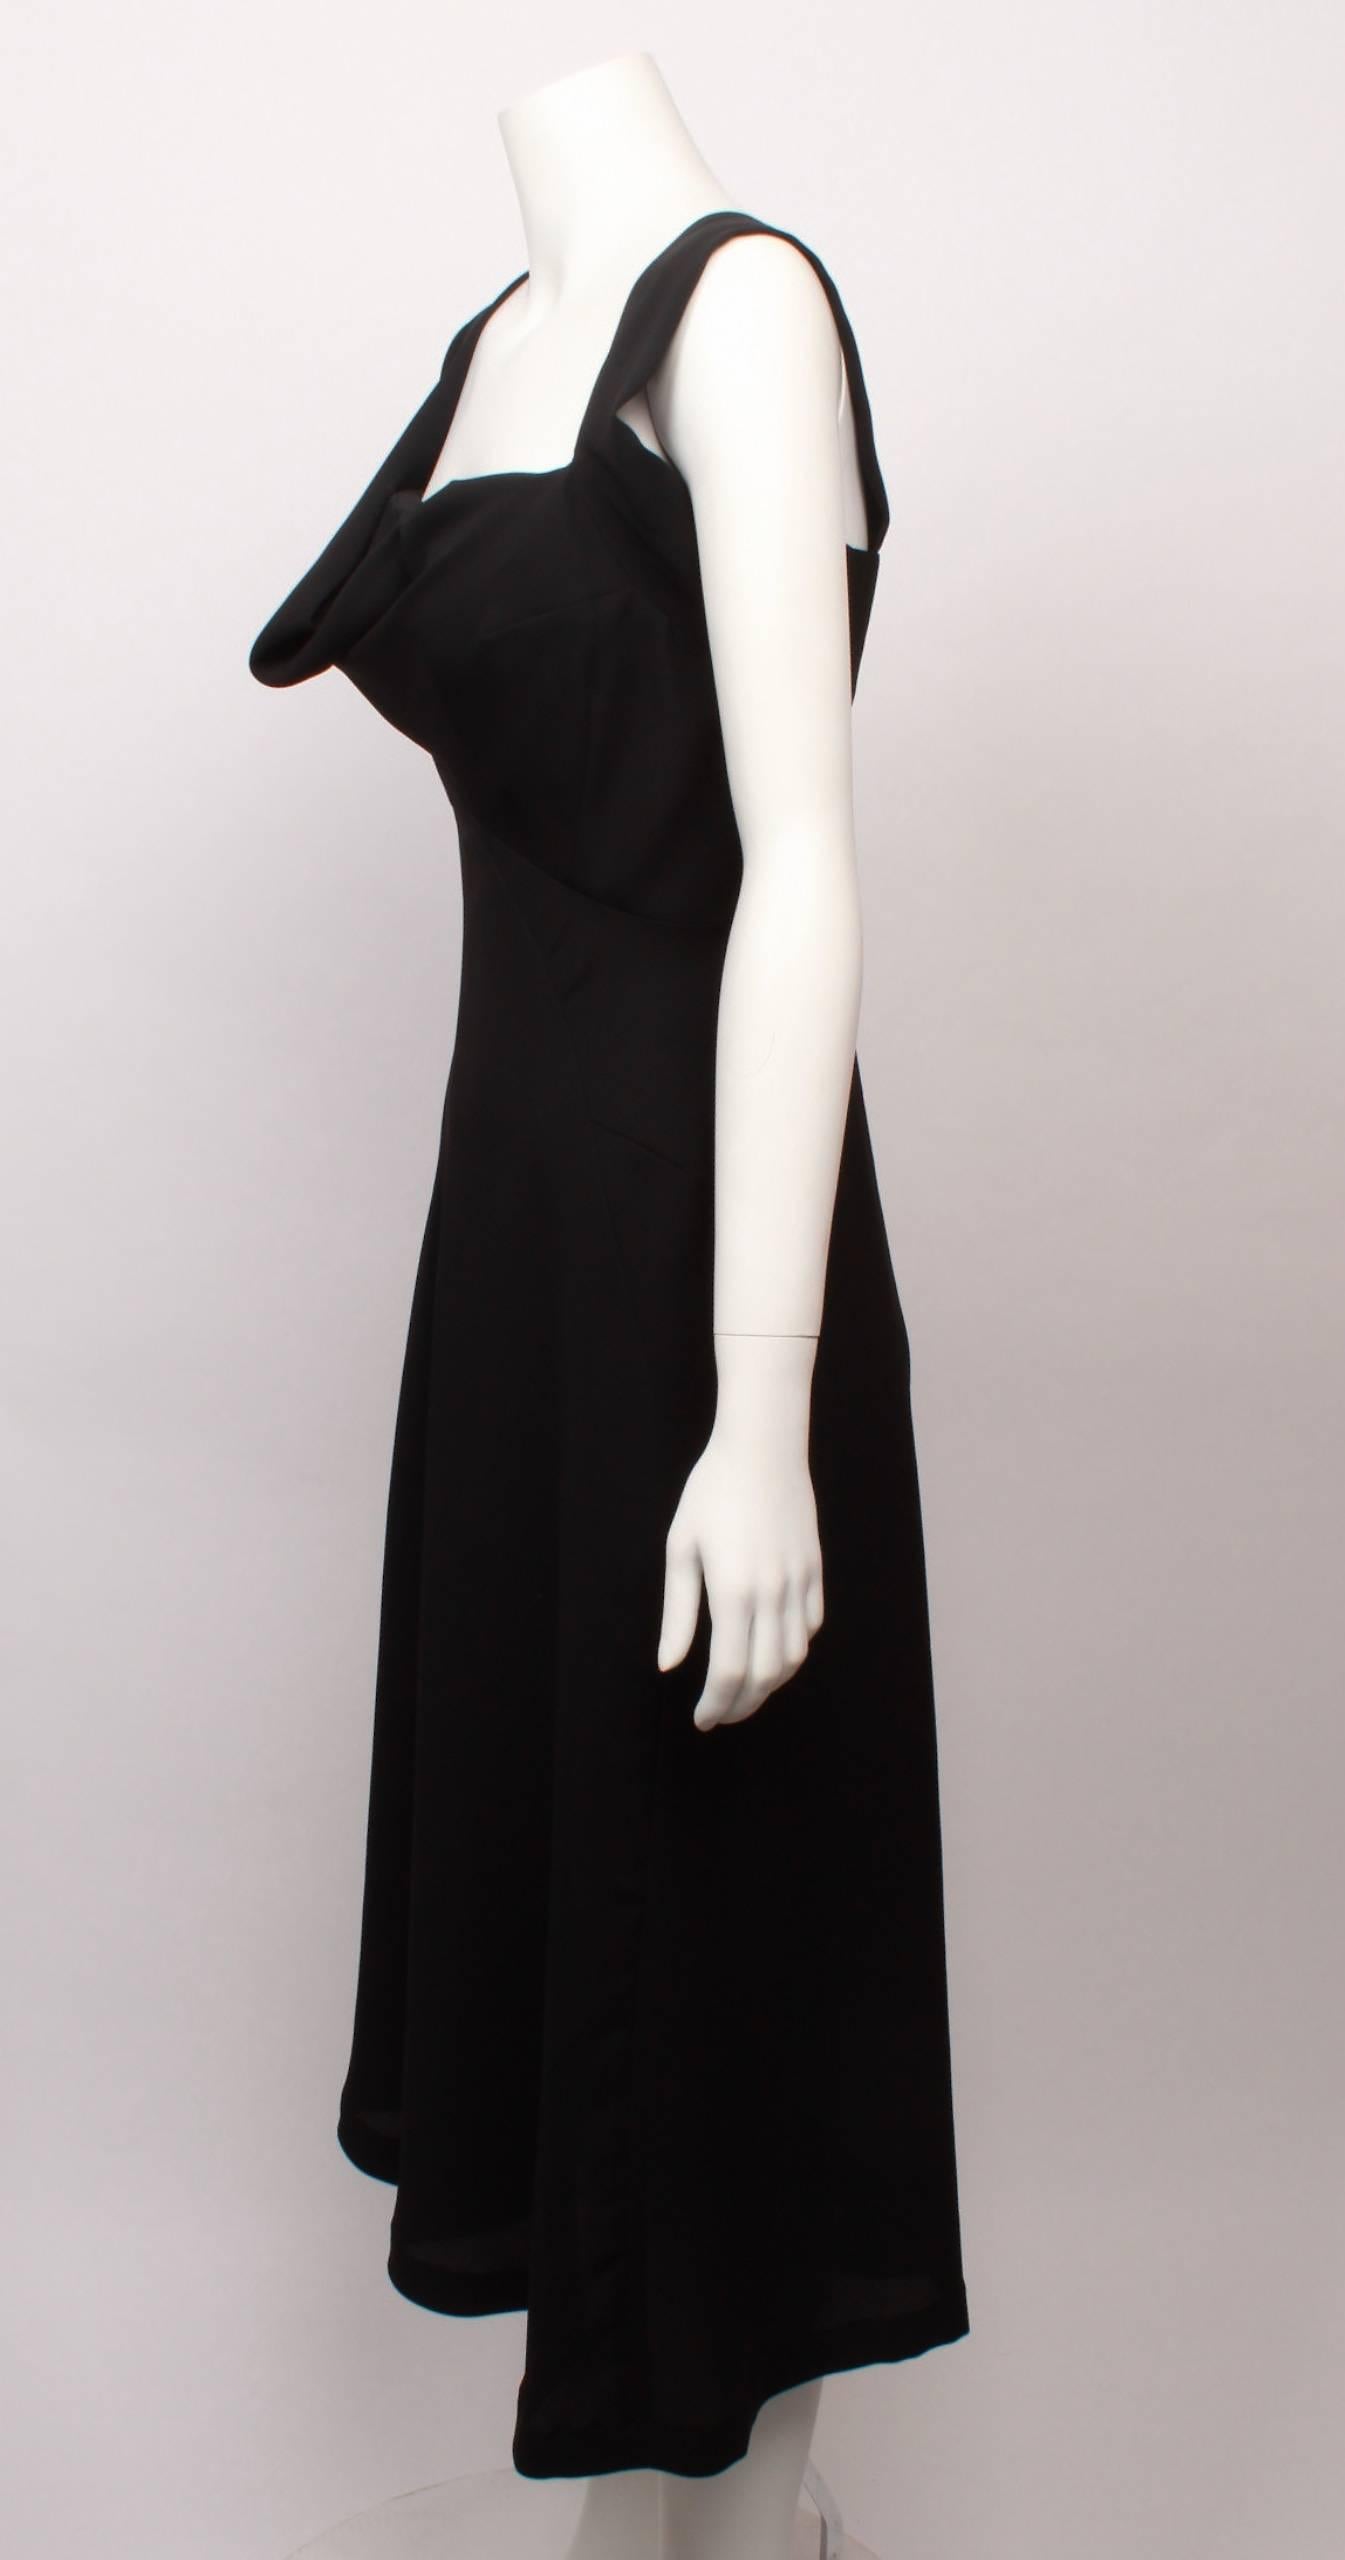 Beautiful Yohji Yamamoto black cocktail dress features draped shoulder straps and front bodice. Bust-line features padded cups within the inner construction. Dress has fitted waistline with dart details and flared hemline. Press stud closure.